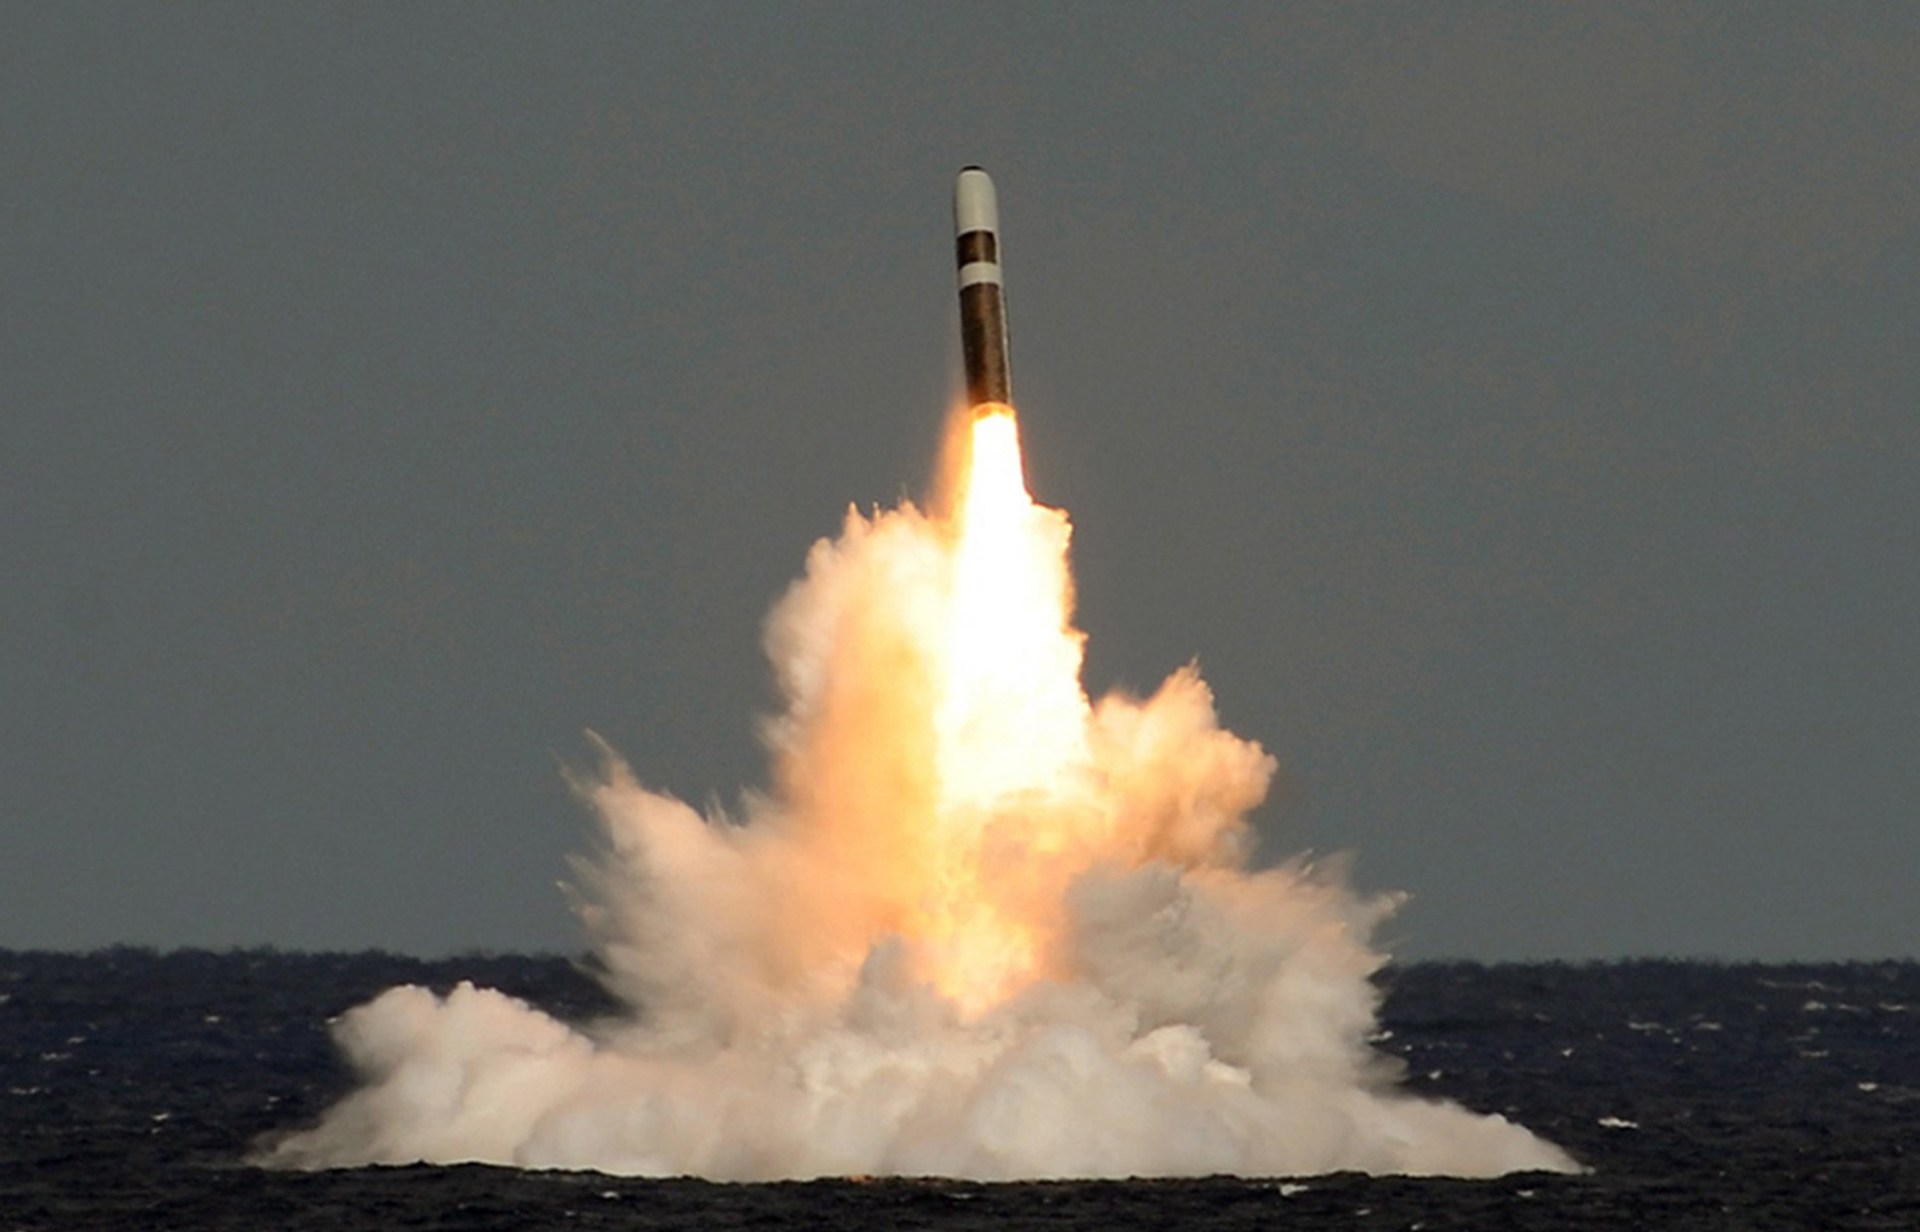 uk nuclear missile test fails - again - after trident missile belly flops into ocean